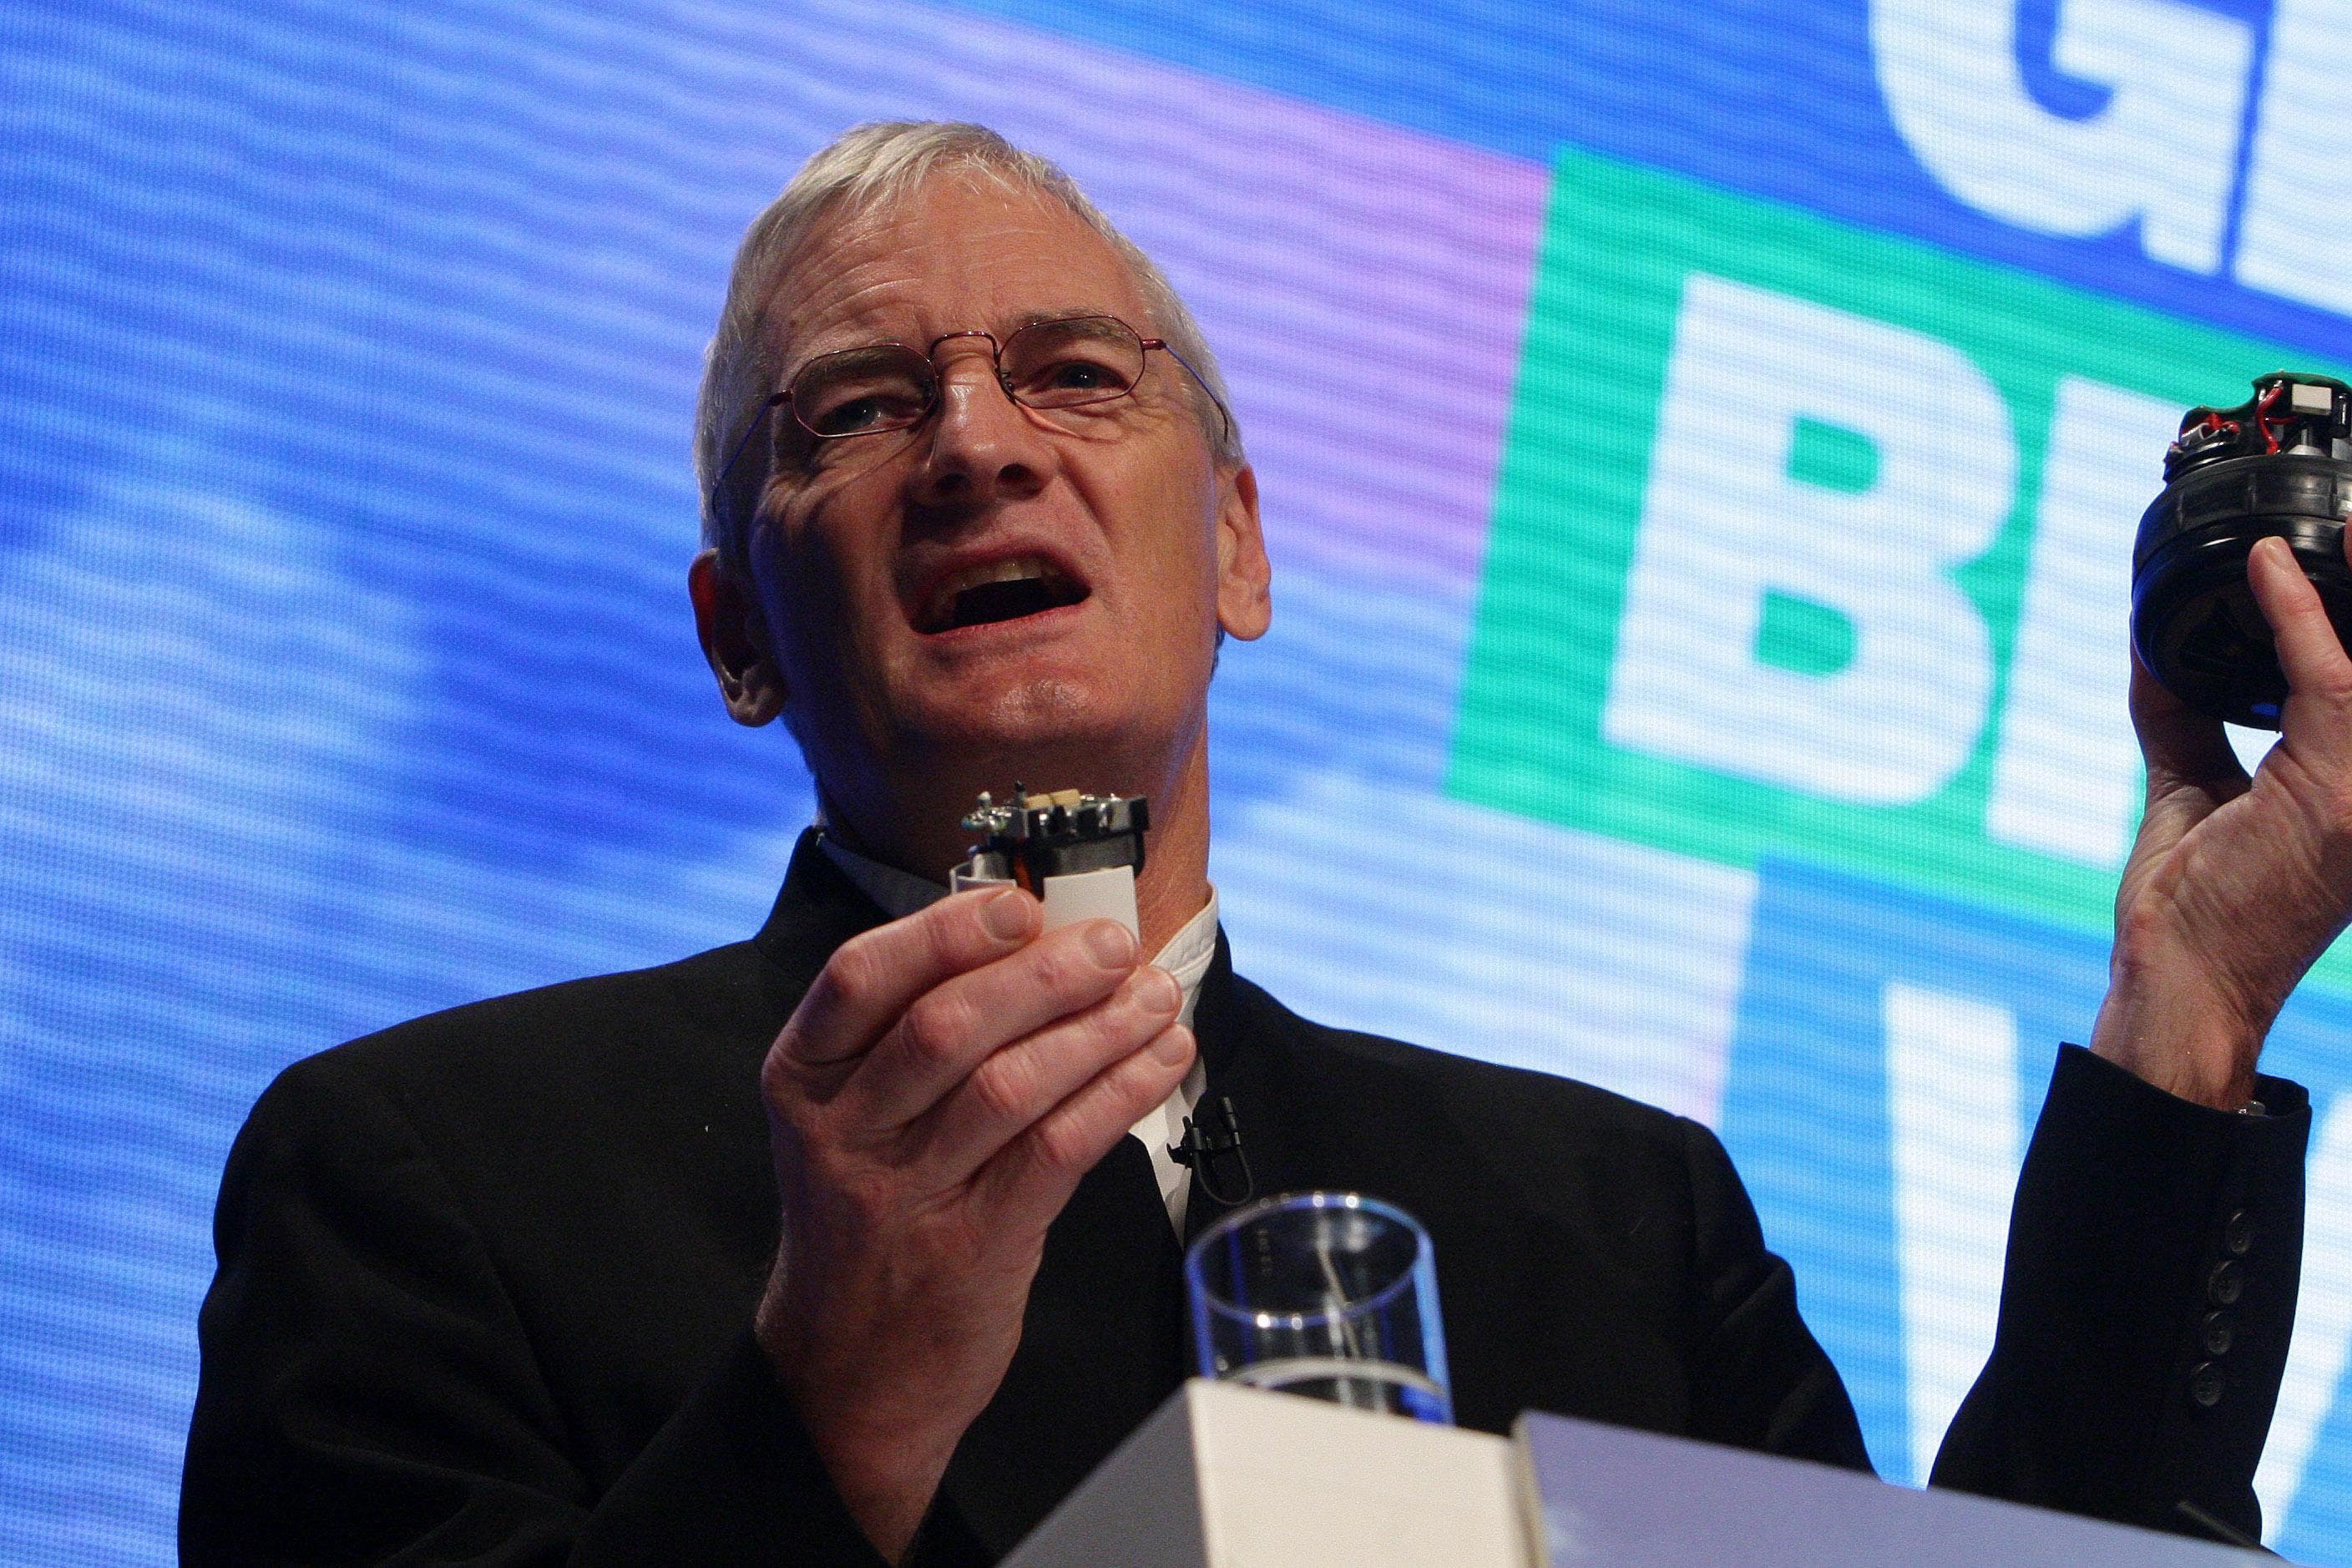 James Dyson has called on the government to demonstrate its ambition for growth in the next statement